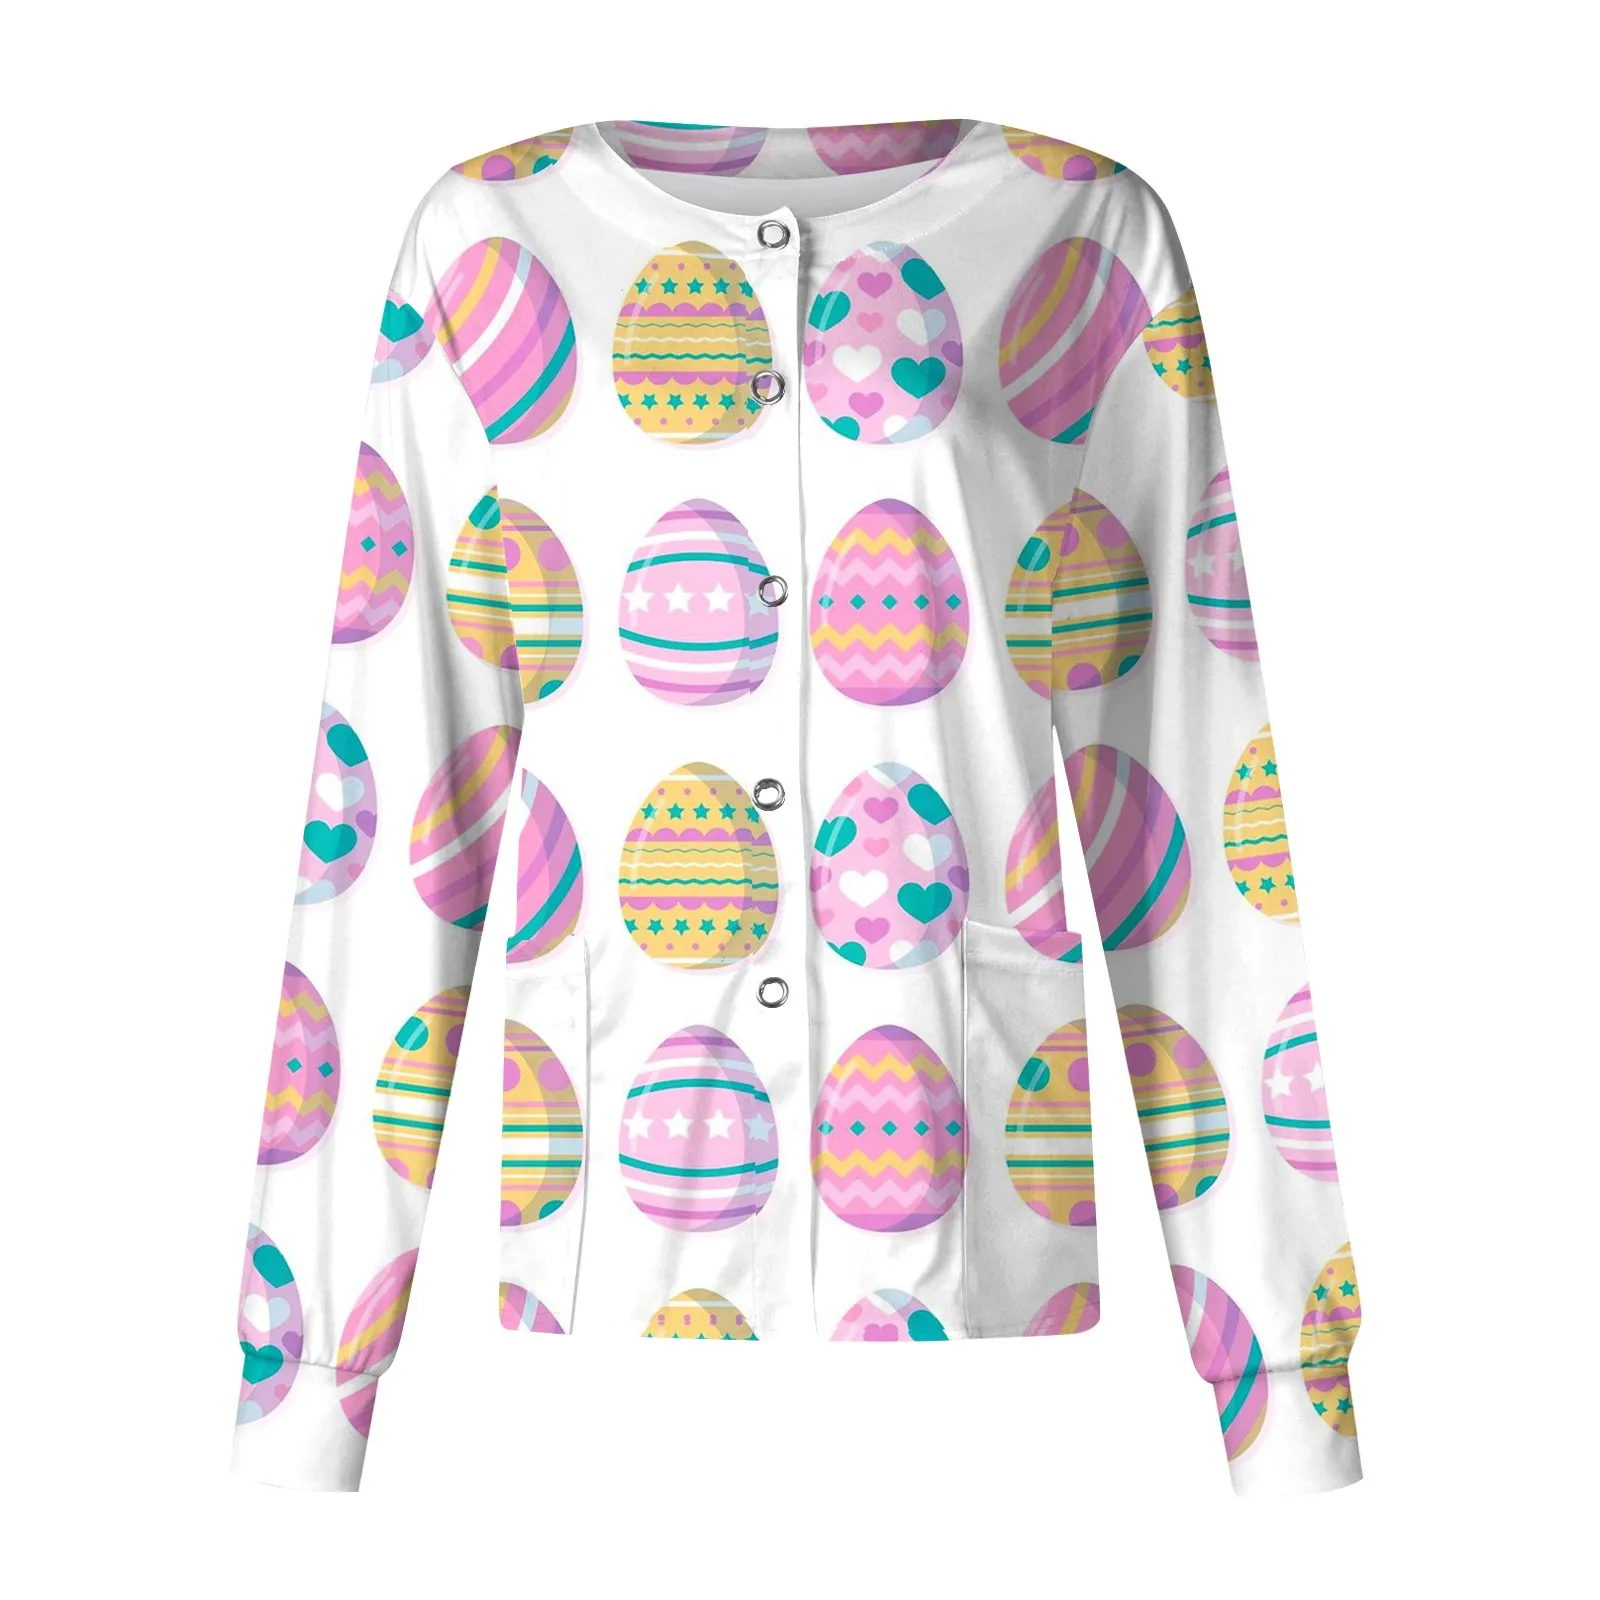 

Women'S Casual Long Sleeve Single Breasted Easter Printed Care Workwear Cardigan Top Graphic Shirts Funny Youthful Woman Clothe